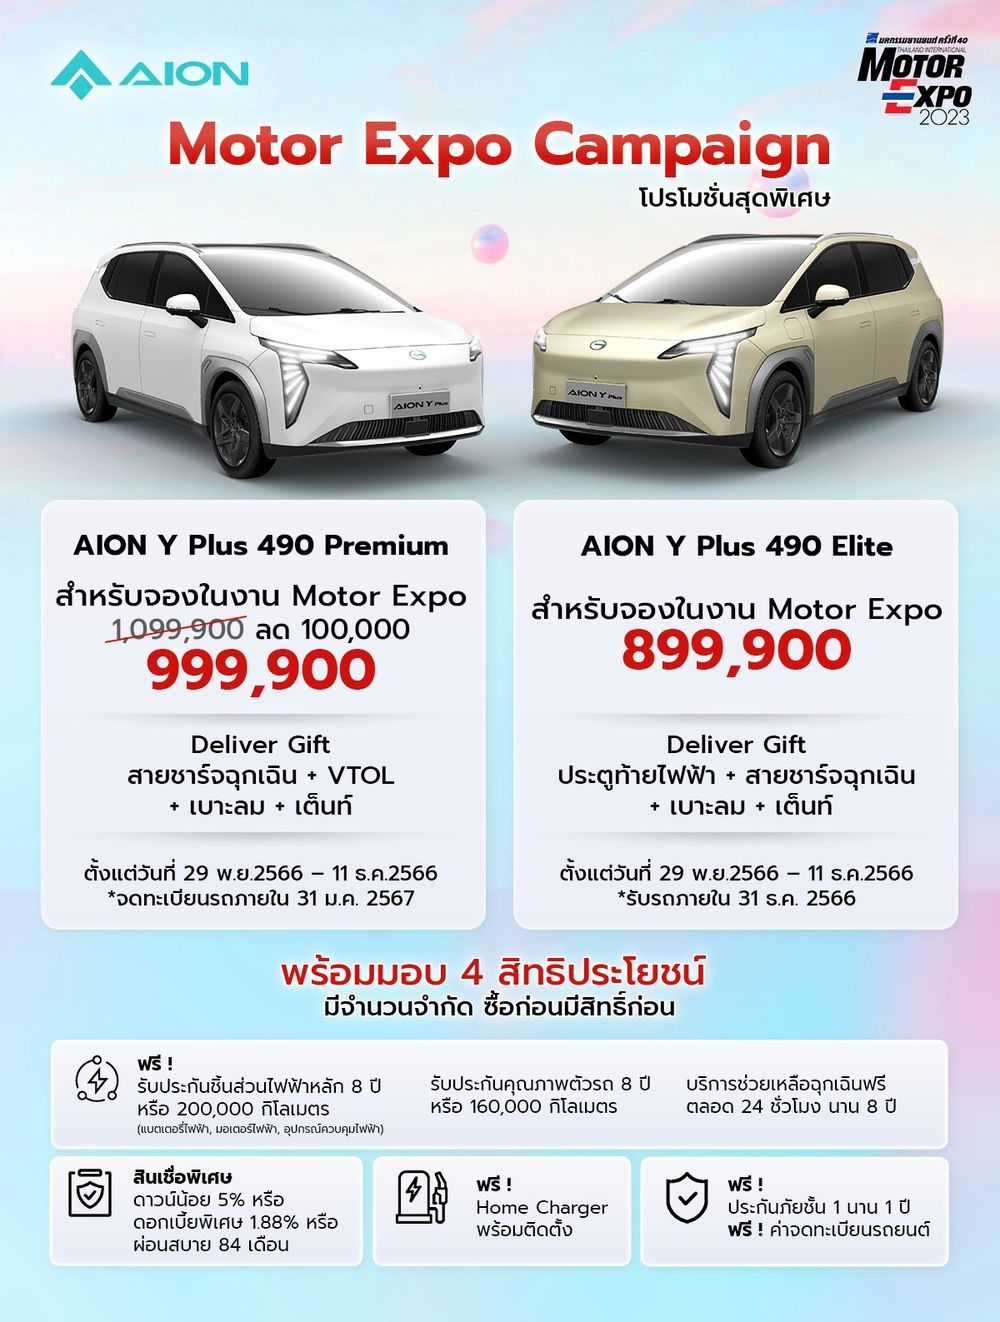 AION Y Plus Motor Expo 2023